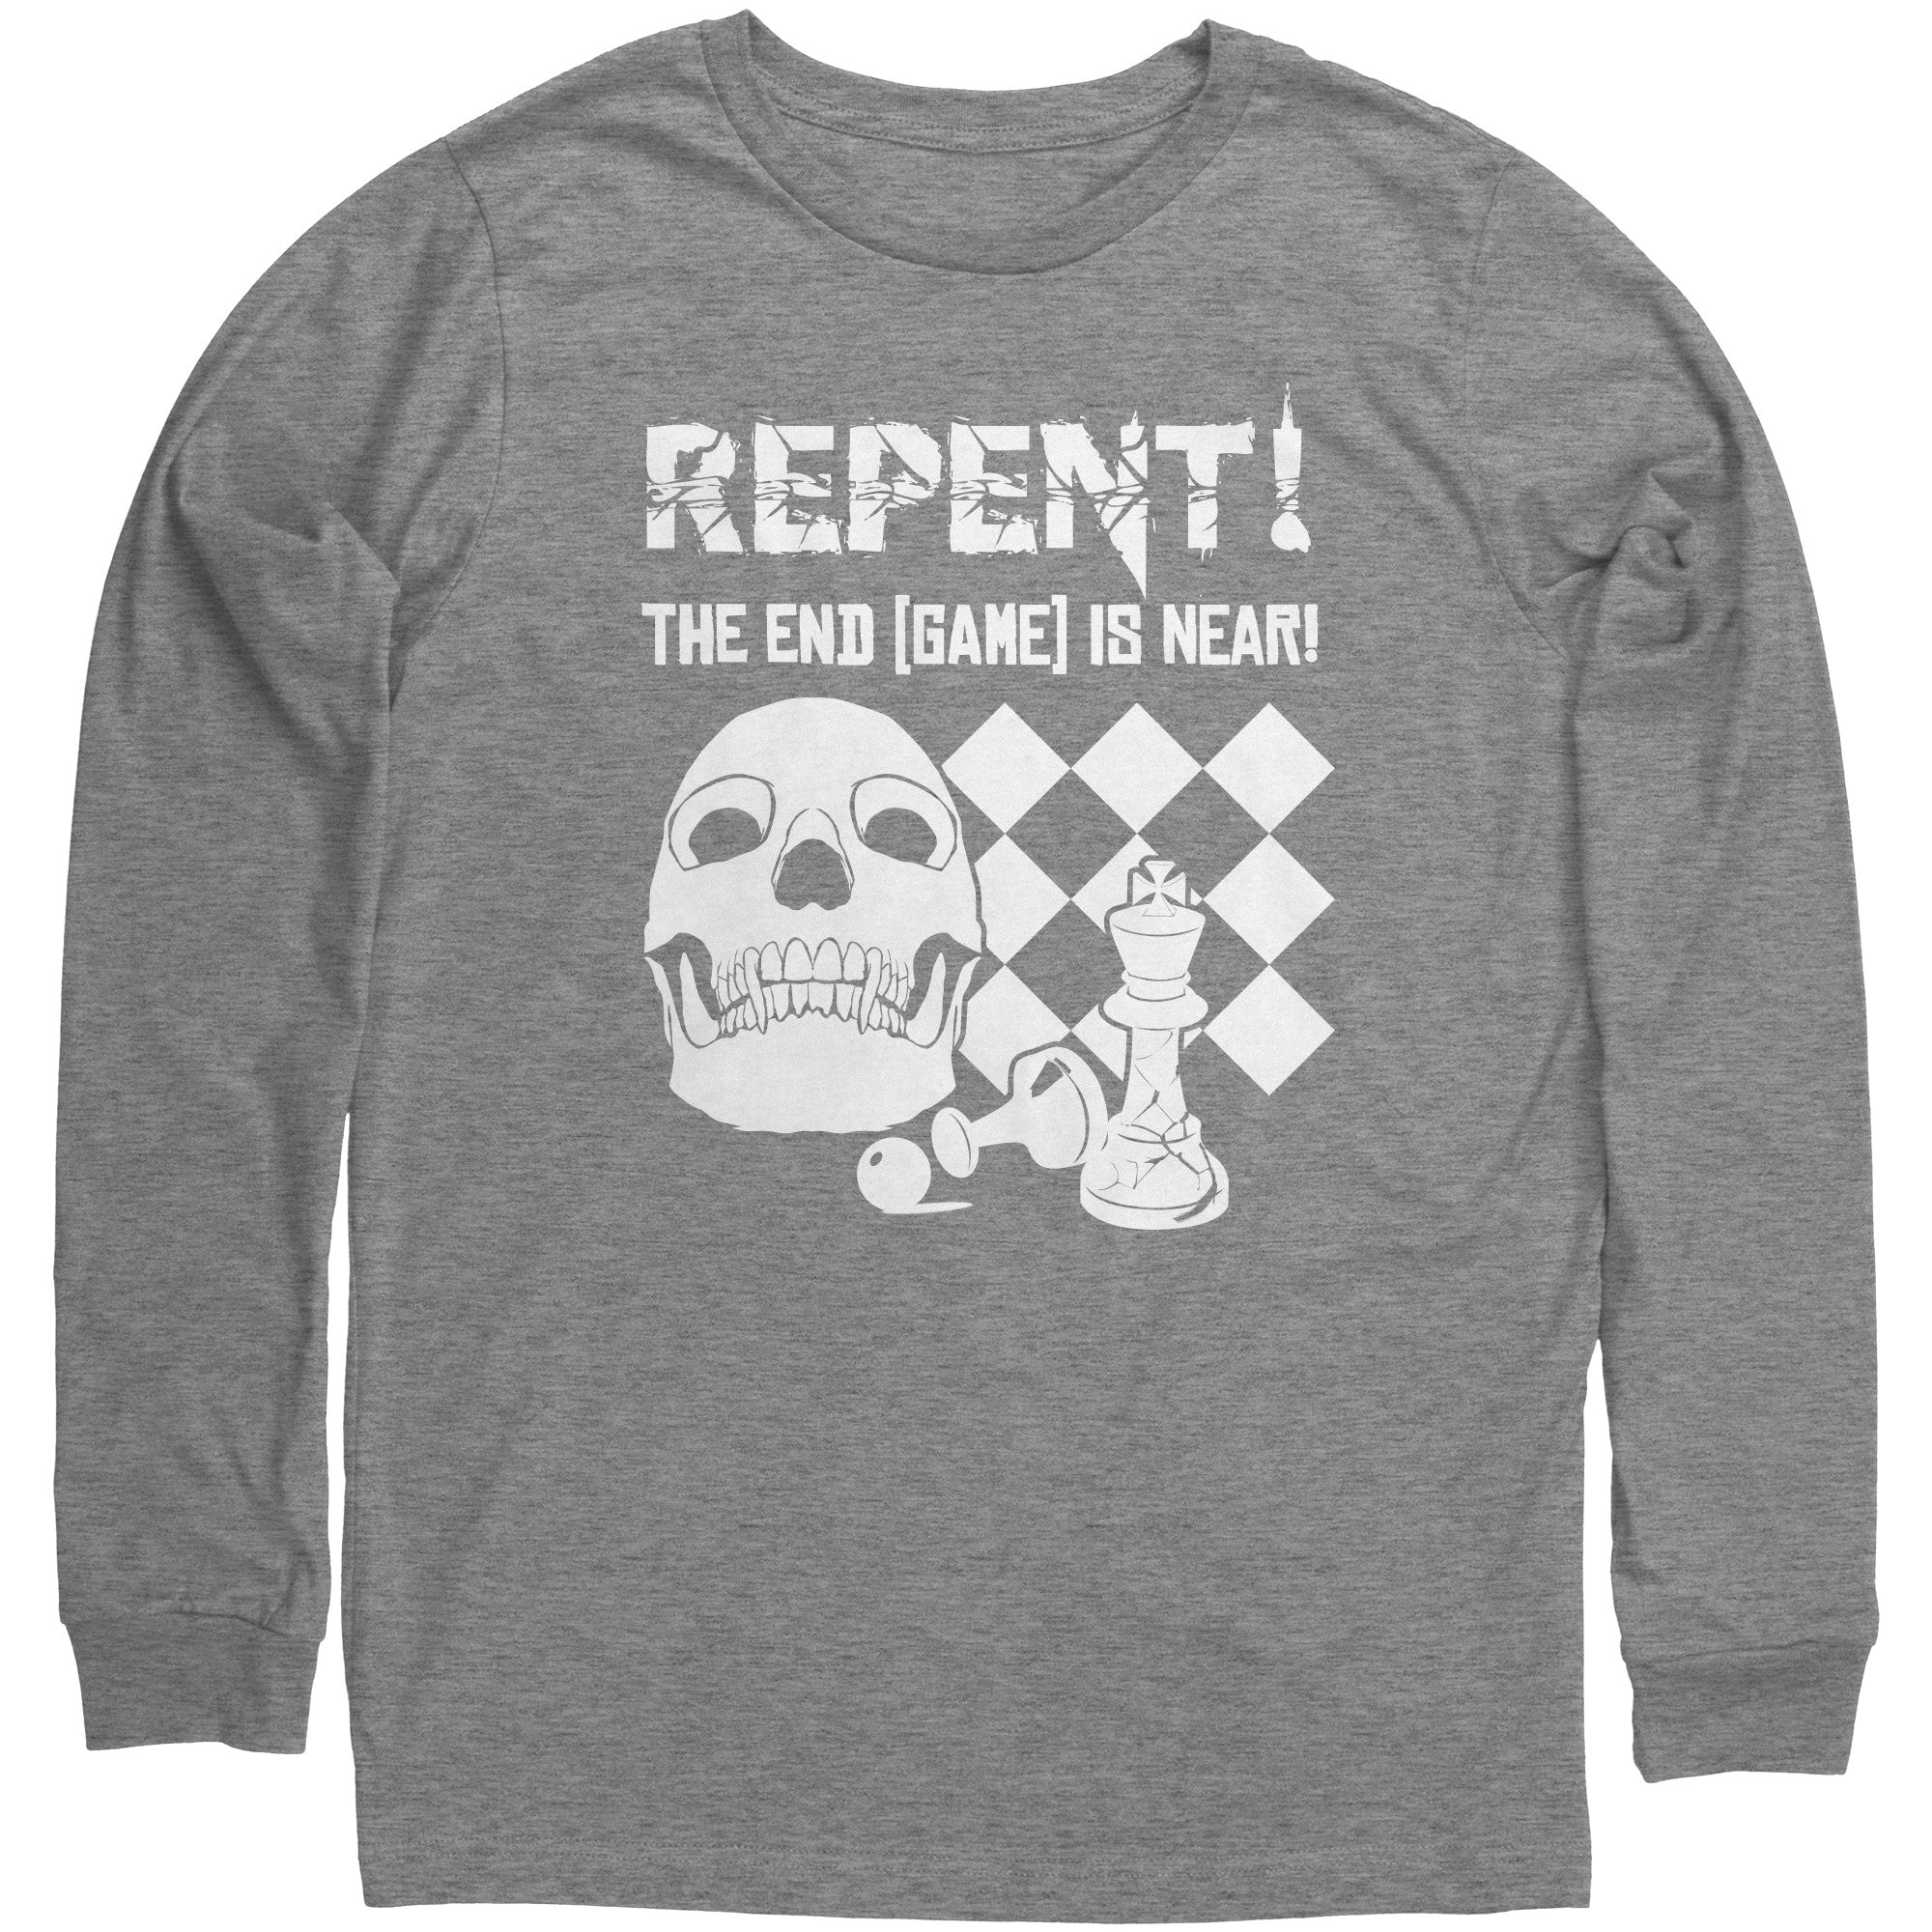 Repent! The end game is near - Unisex long sleeve T-shirt